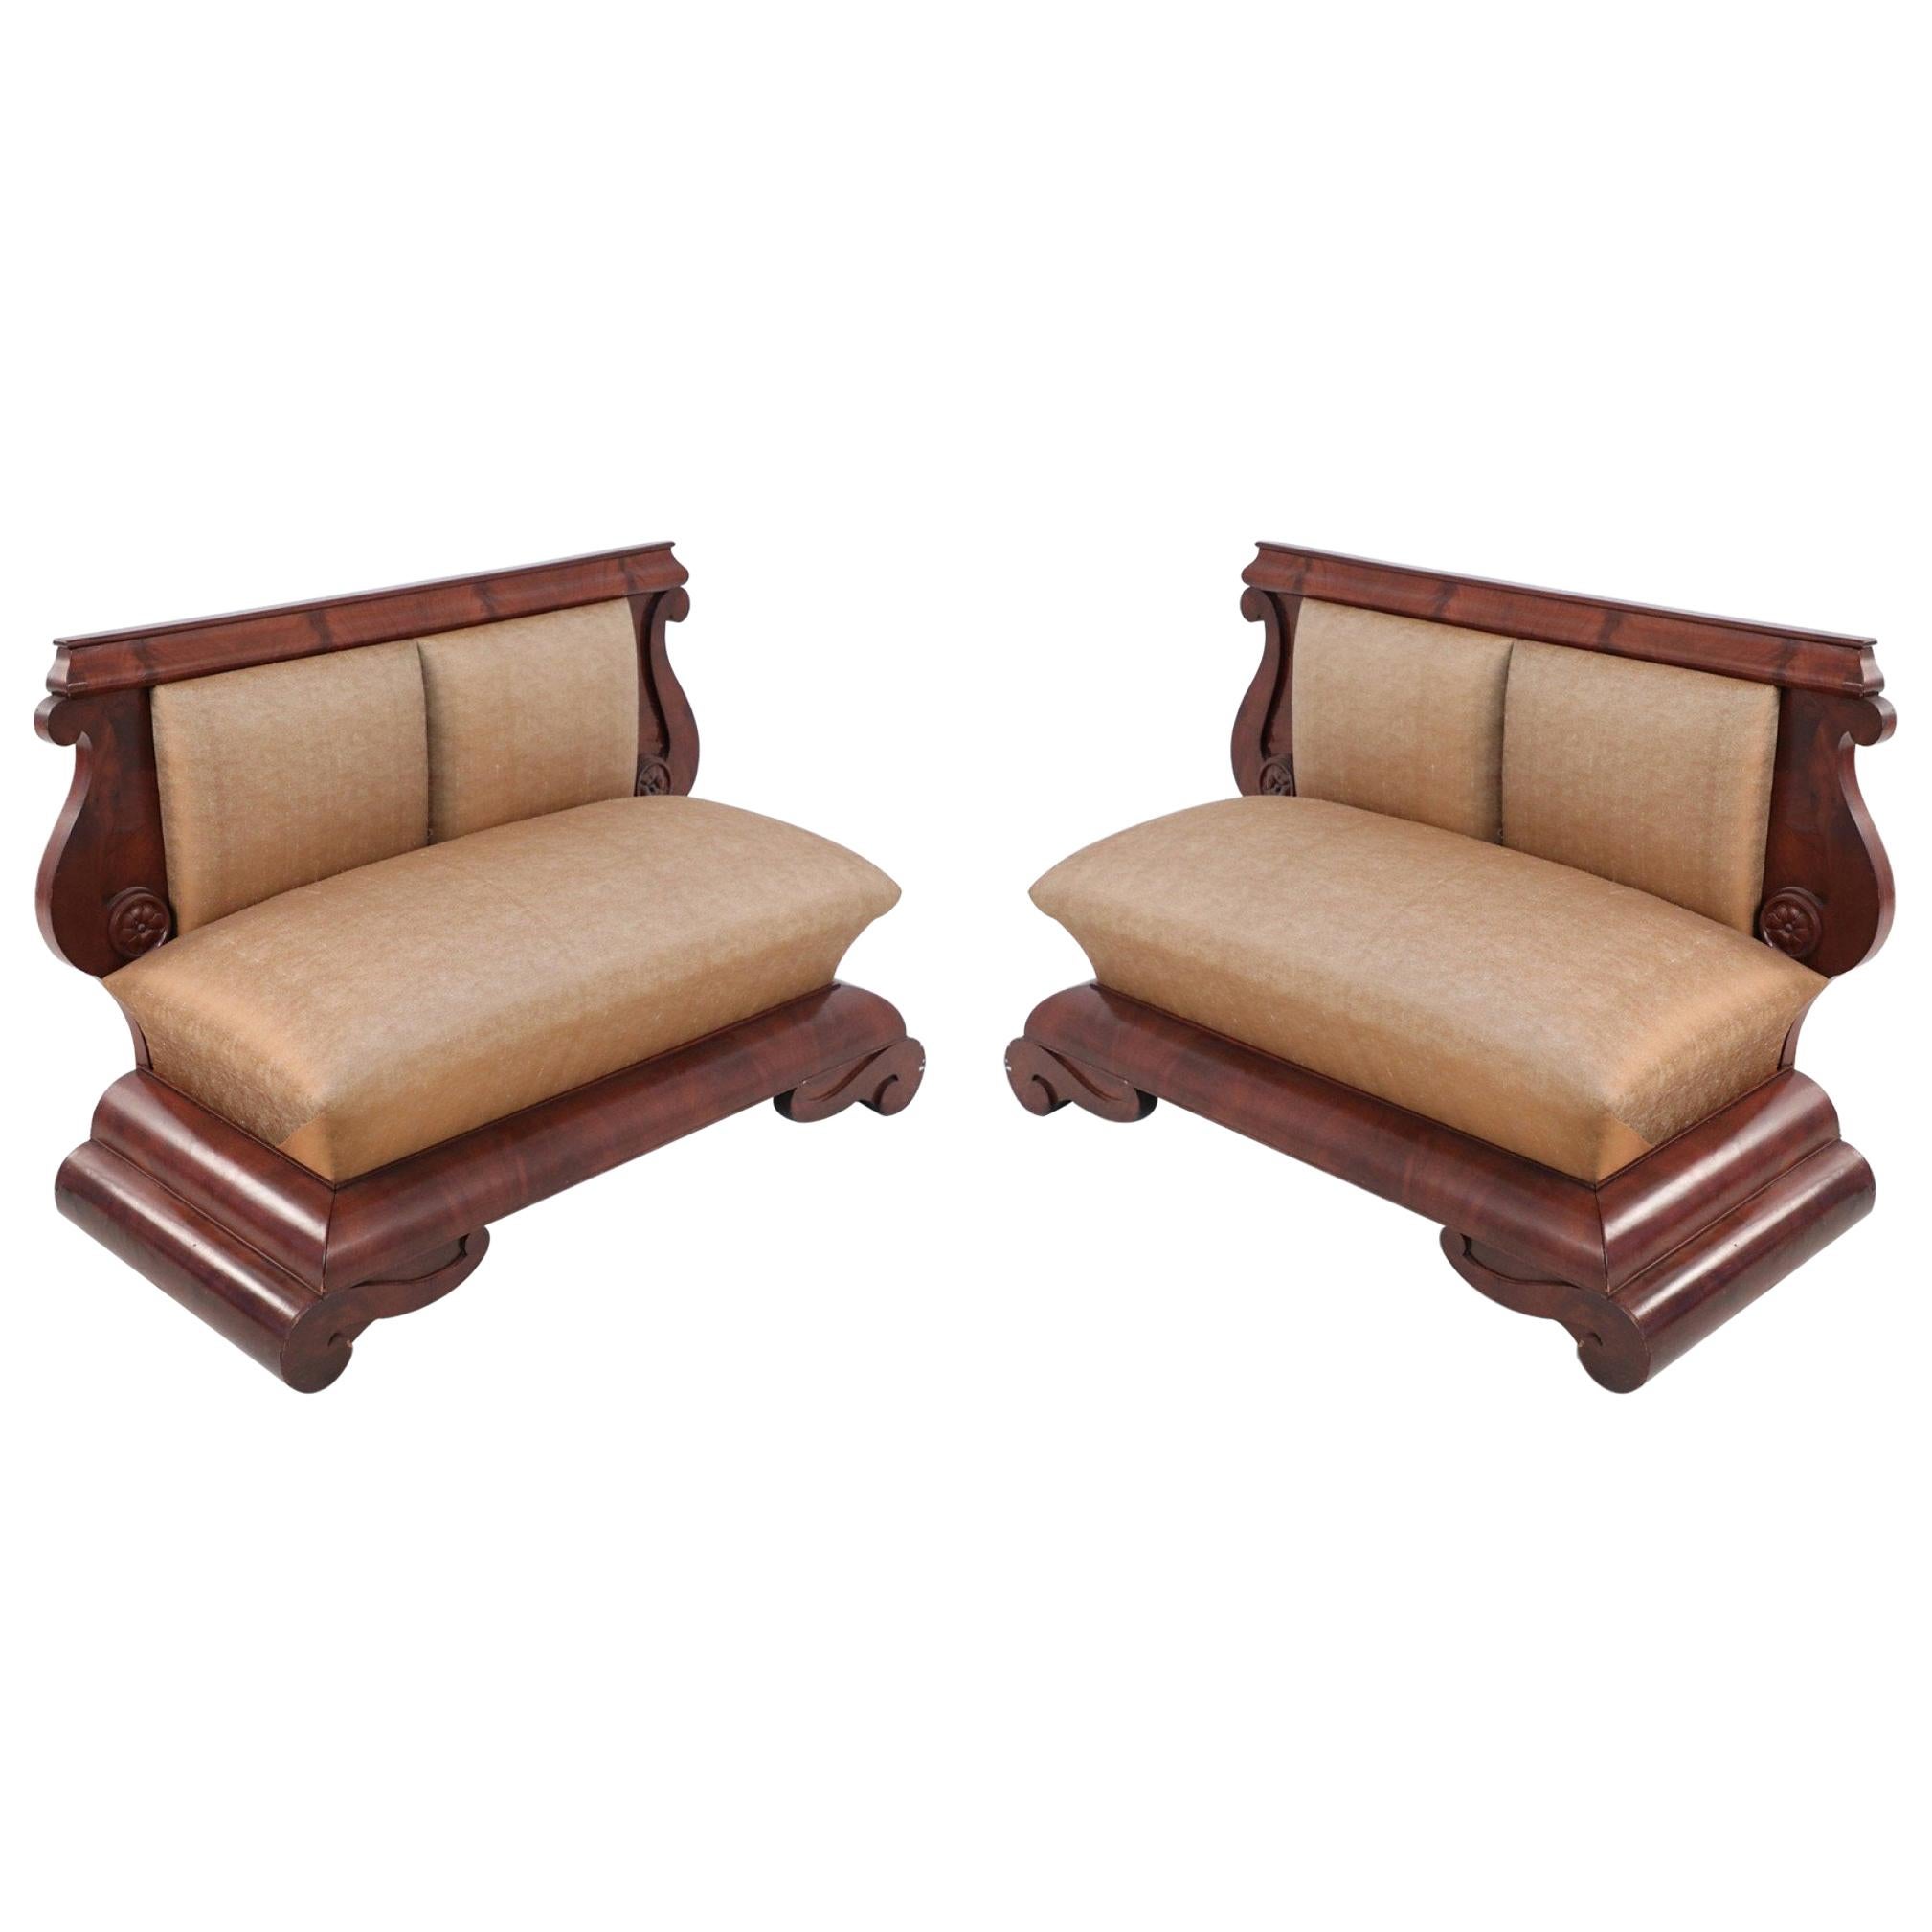 Pair of American Empire Crotch Mahogany Veneer Upholstered Window Seats For Sale